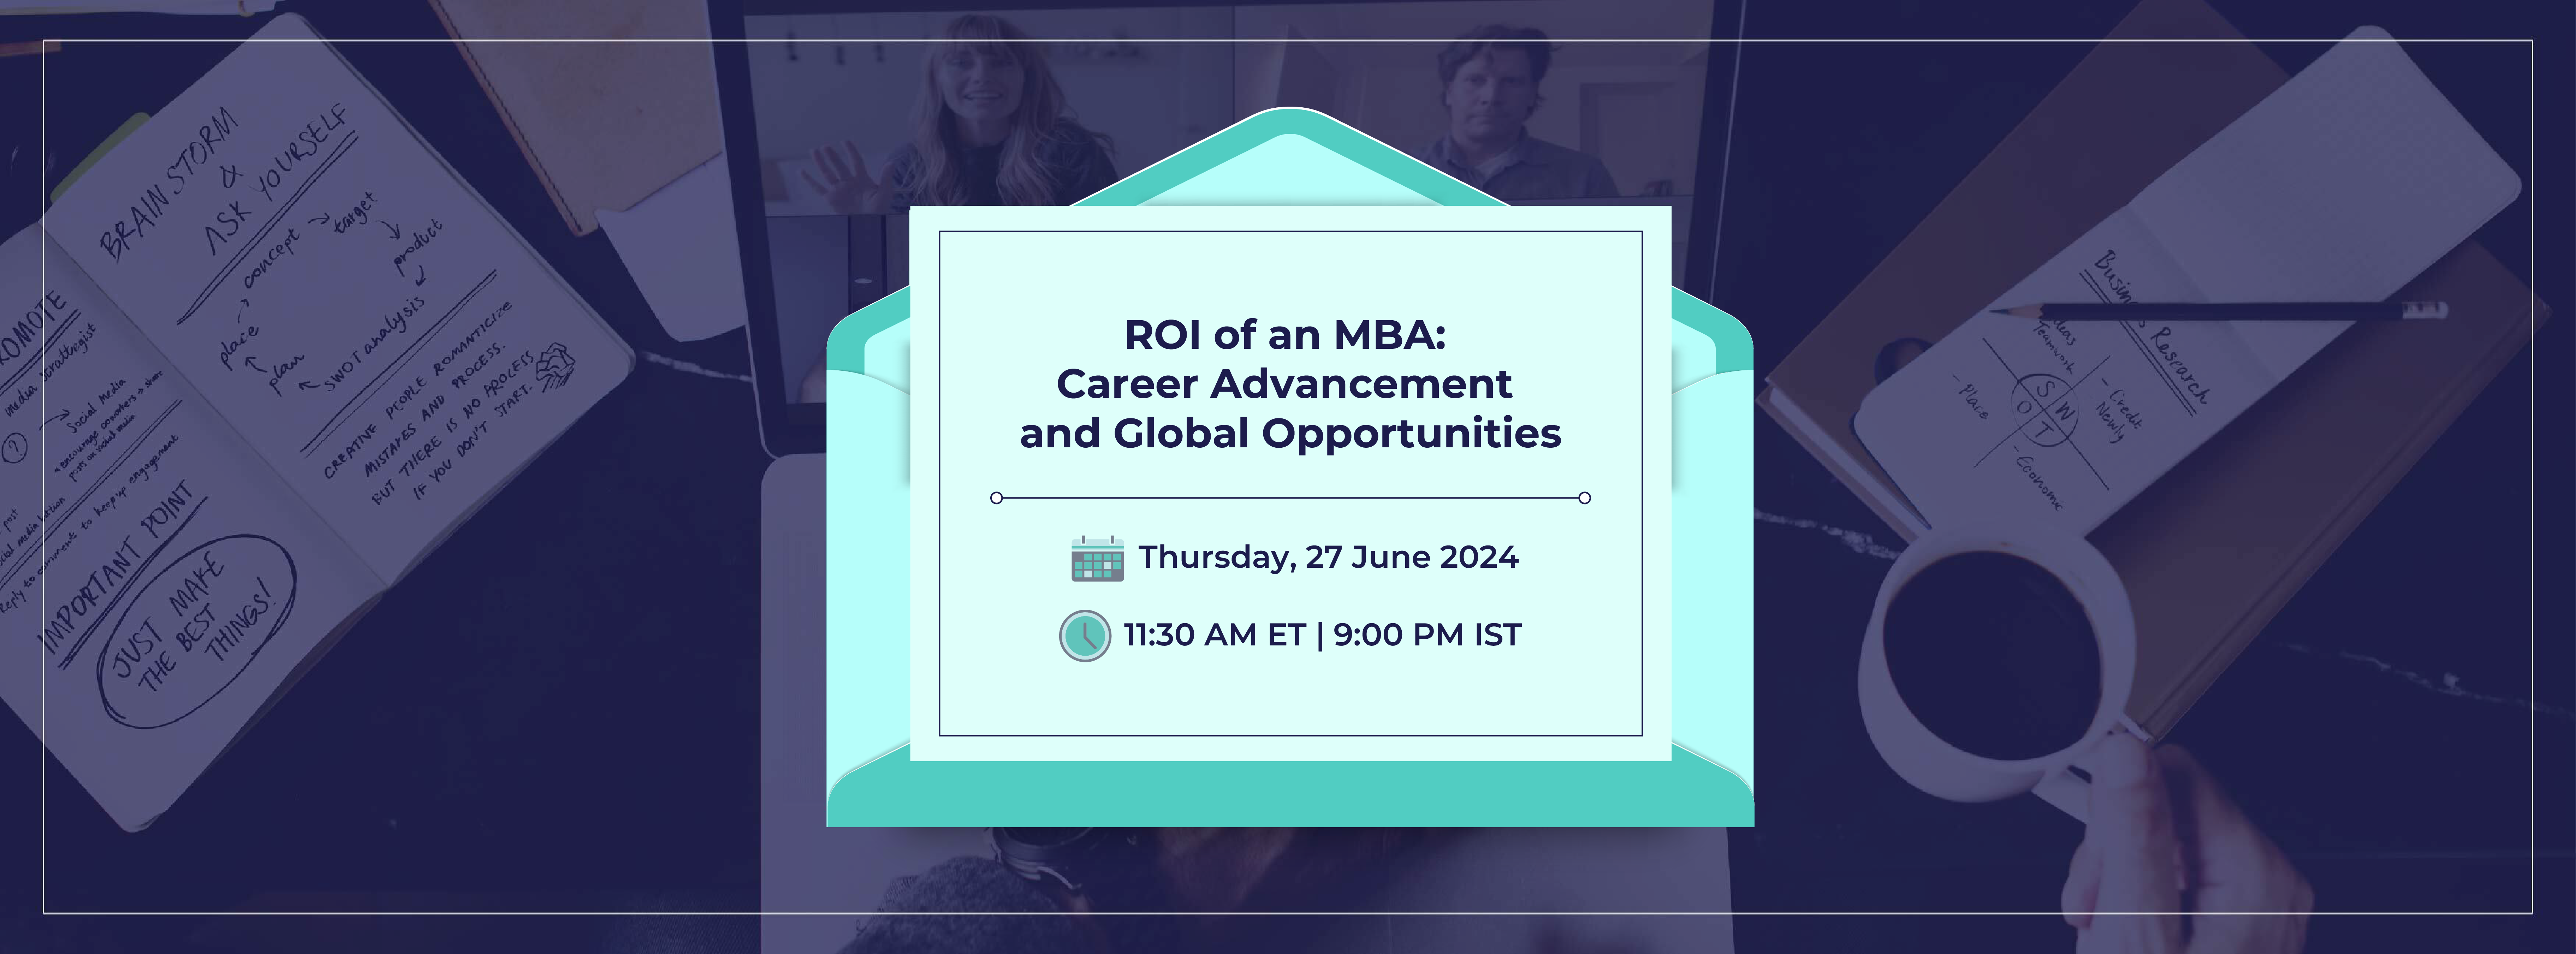 ROI of an MBA: Career Advancement and Global Opportunities 